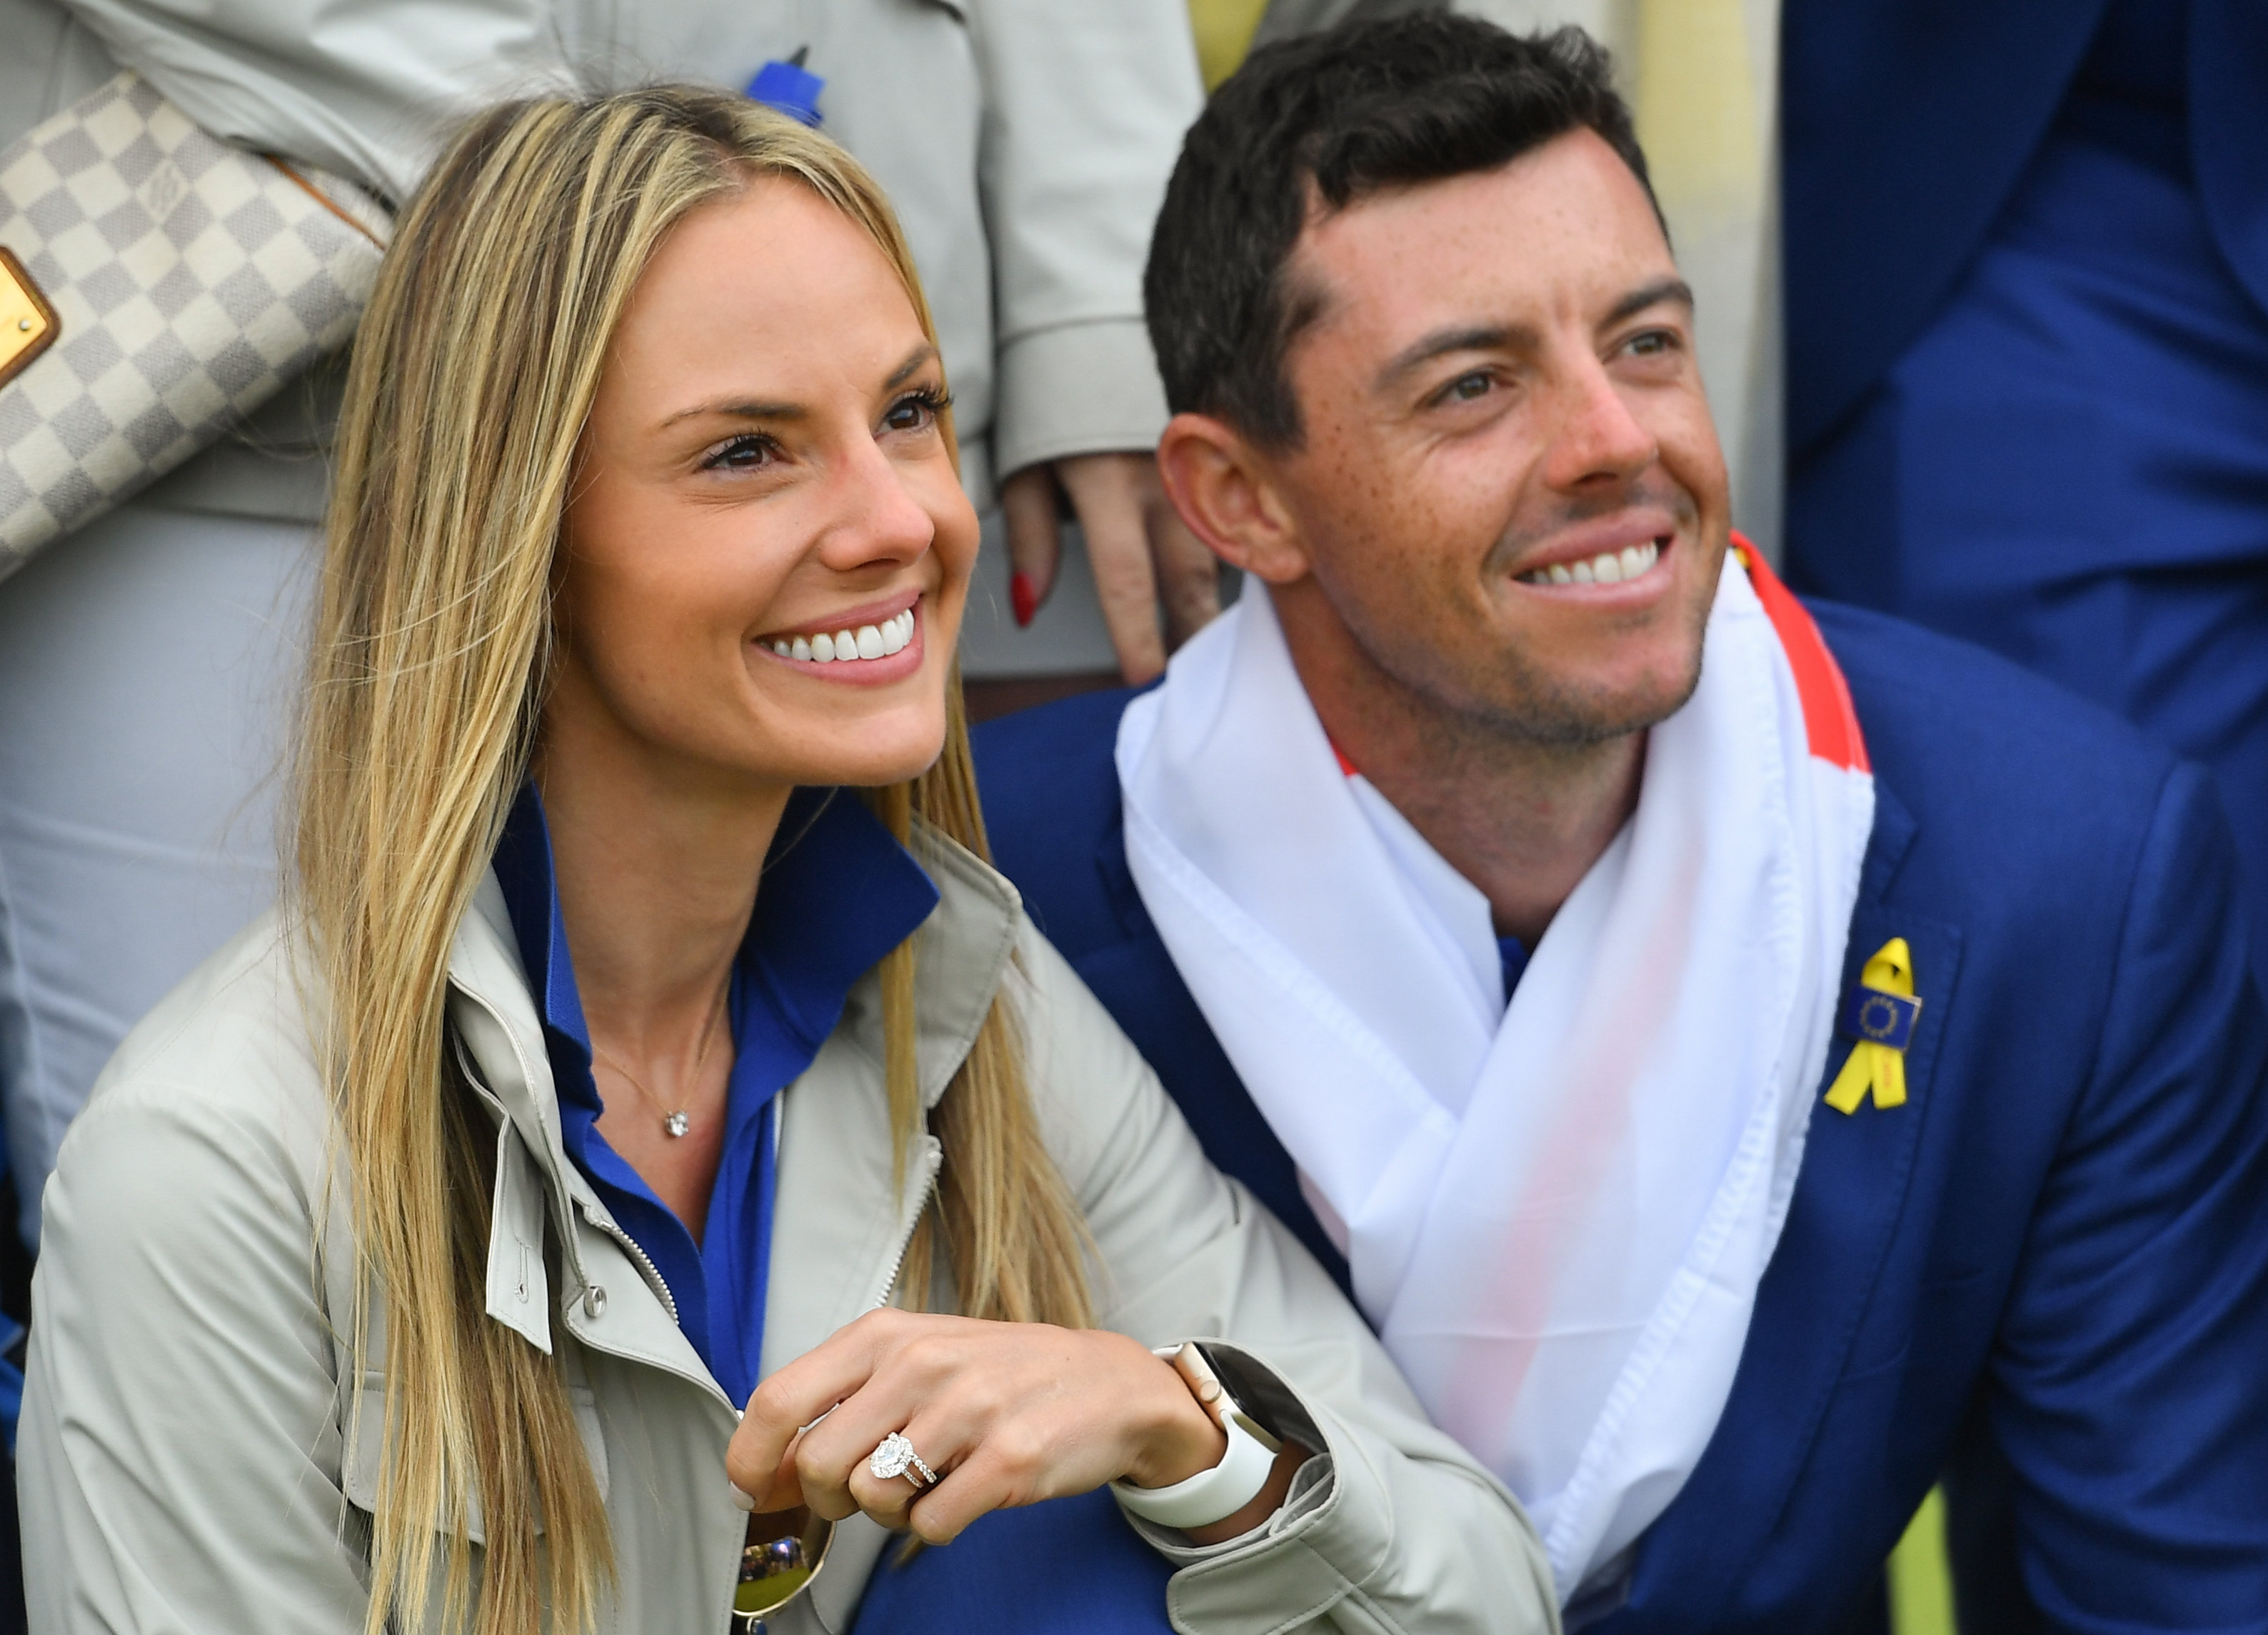 Baby news has caused my mind to wander, says Rory McIlroy